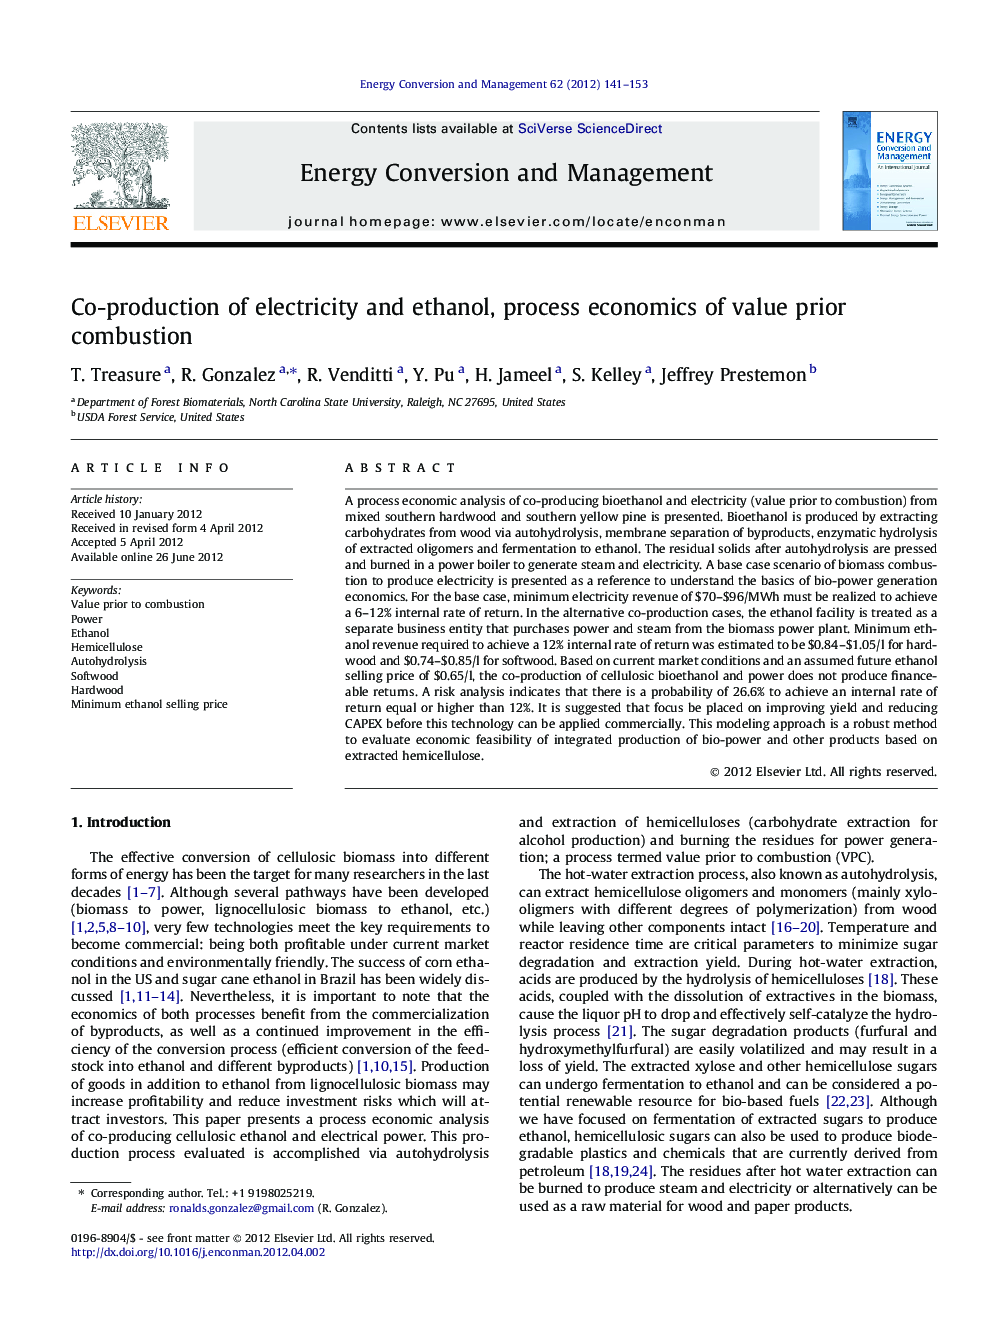 Co-production of electricity and ethanol, process economics of value prior combustion